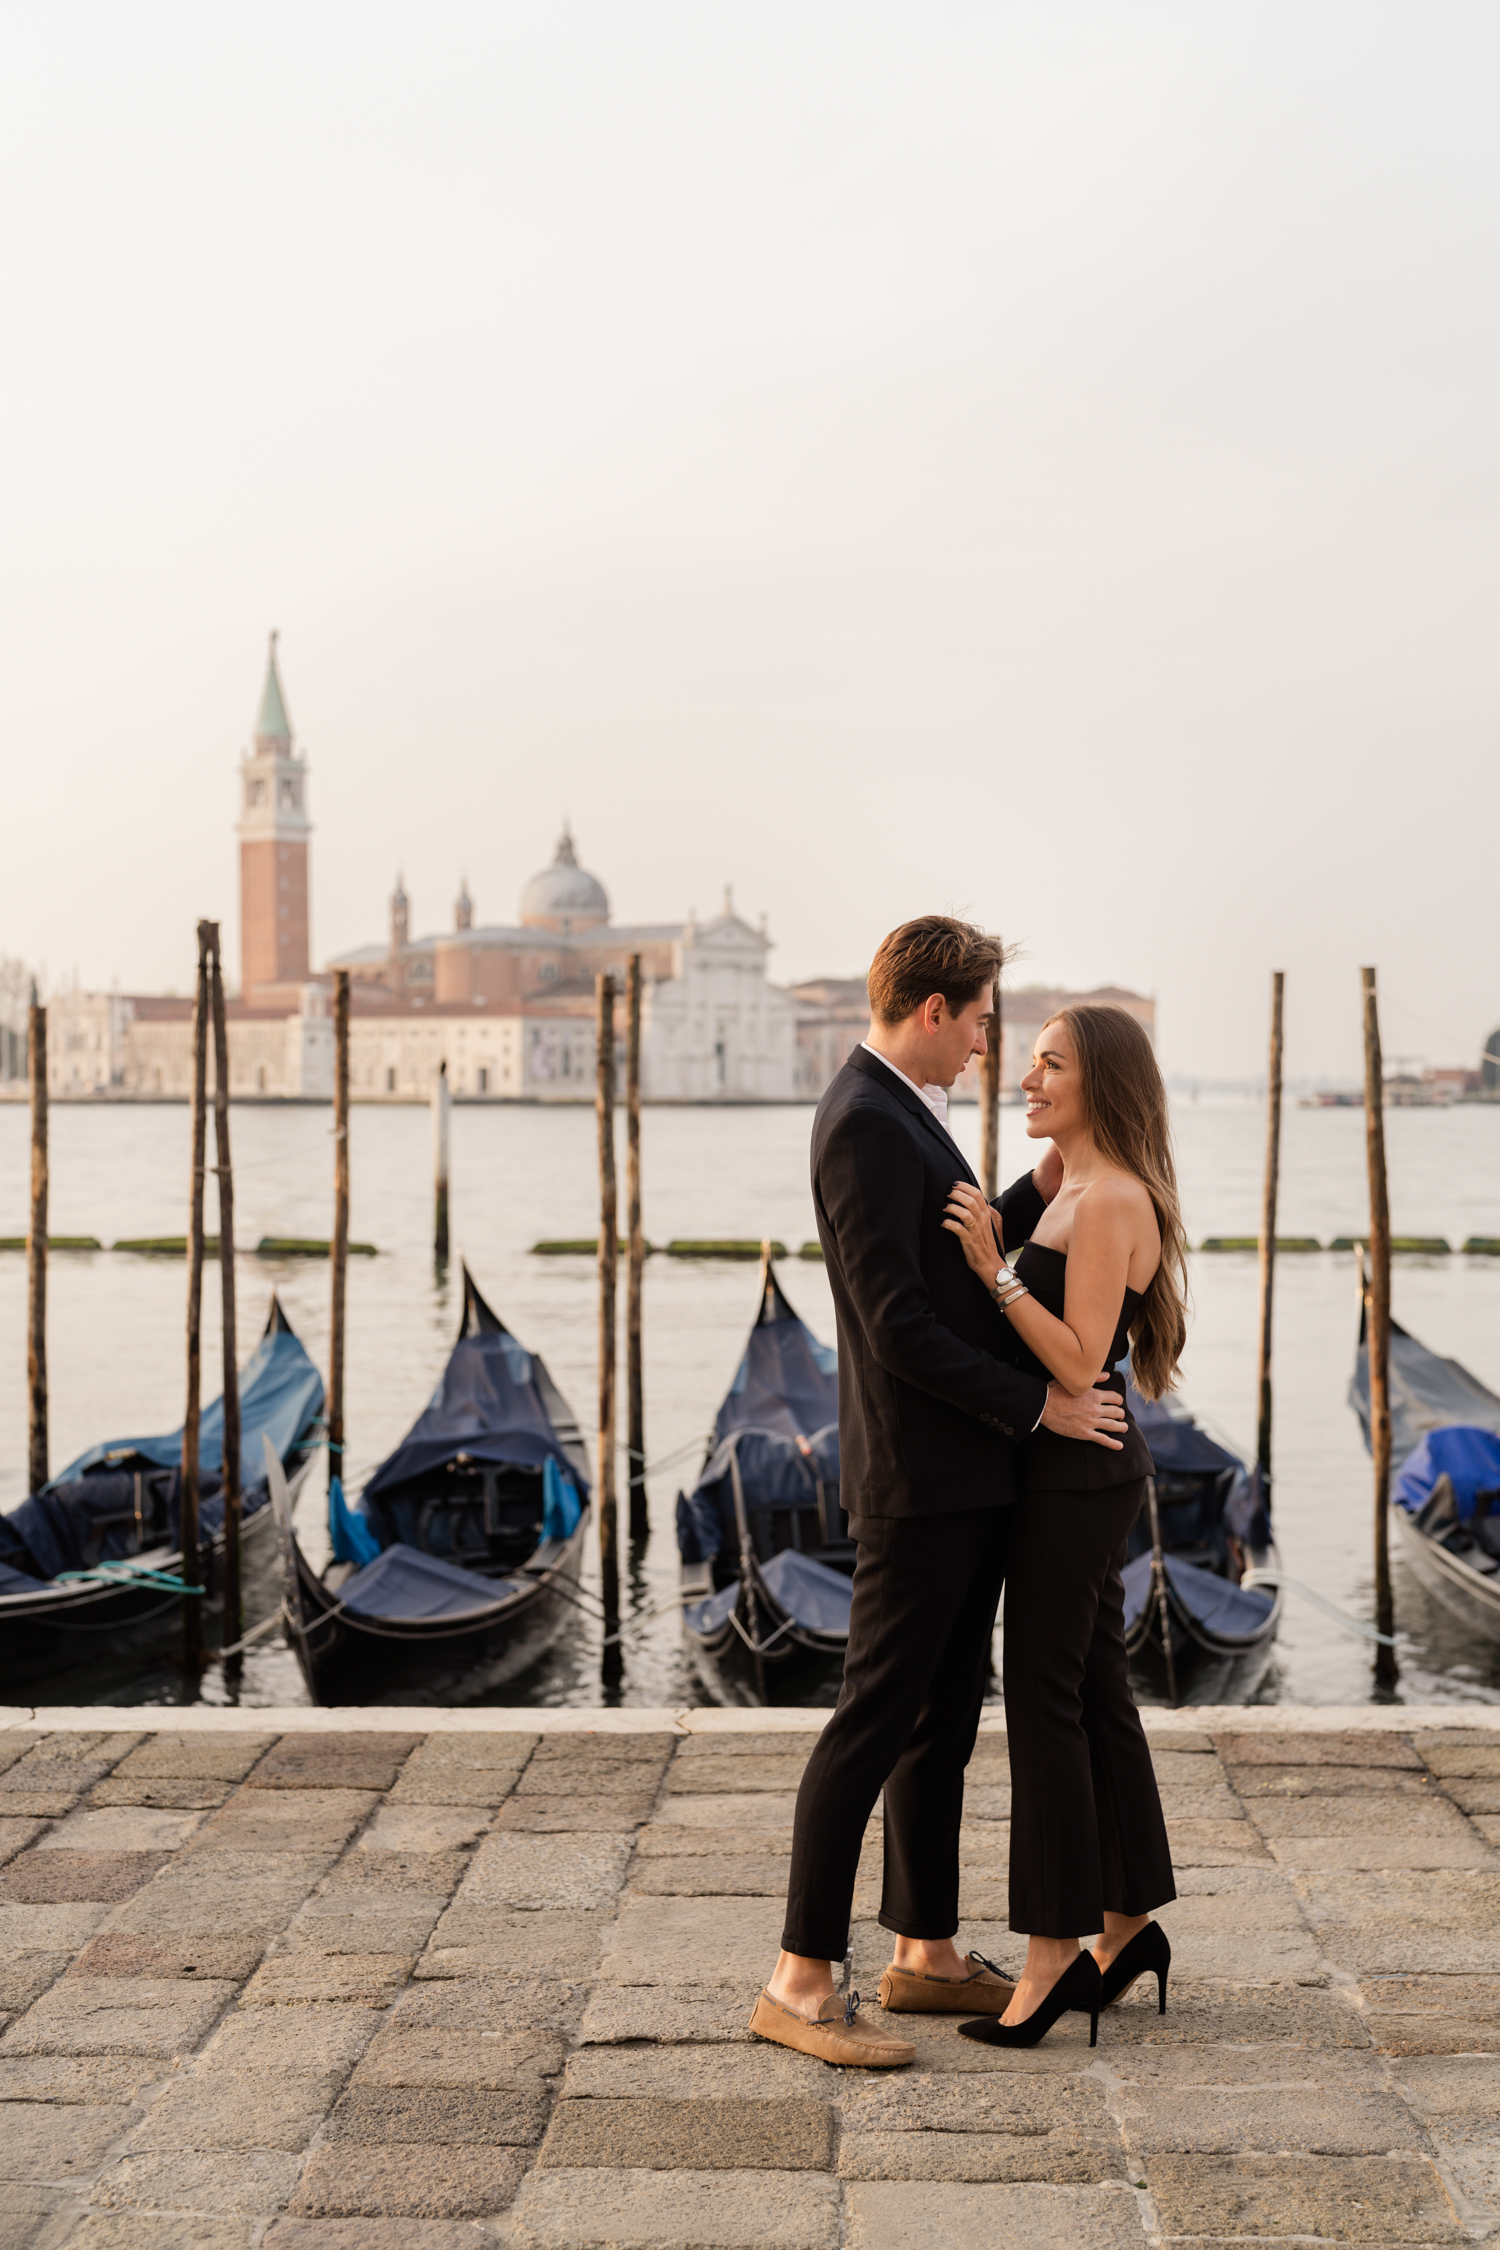 Venice Photographer Alina Indi shares the best wedding pictures and couple photographs. This is the blog where you can find useful Venice photography articles (fine art film photography and digital), Venice weddings and Venice tips for your honeymoon.